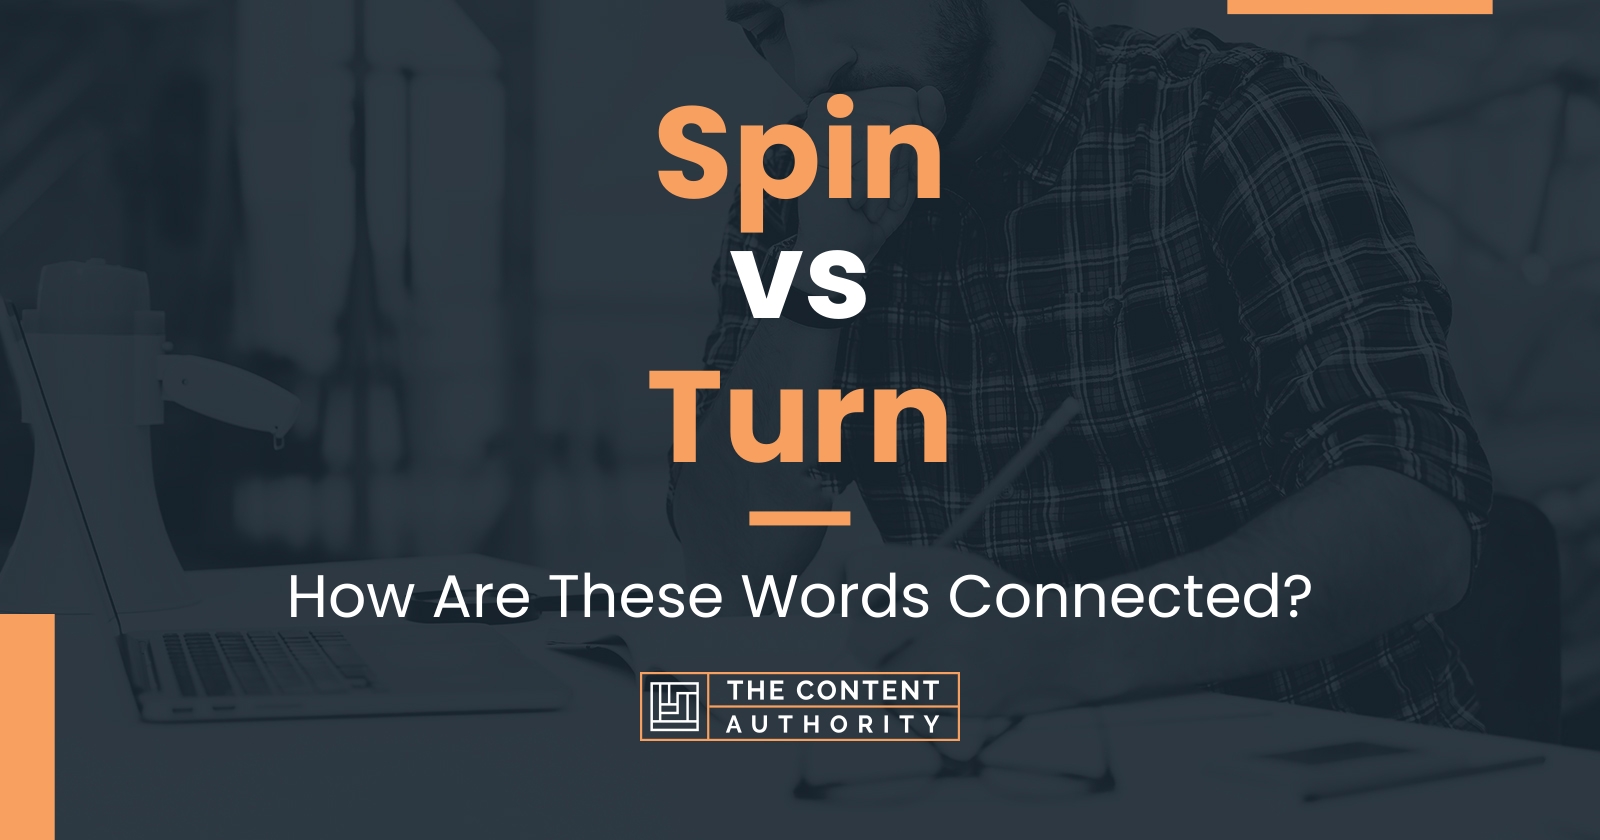 Spin vs Turn: How Are These Words Connected?